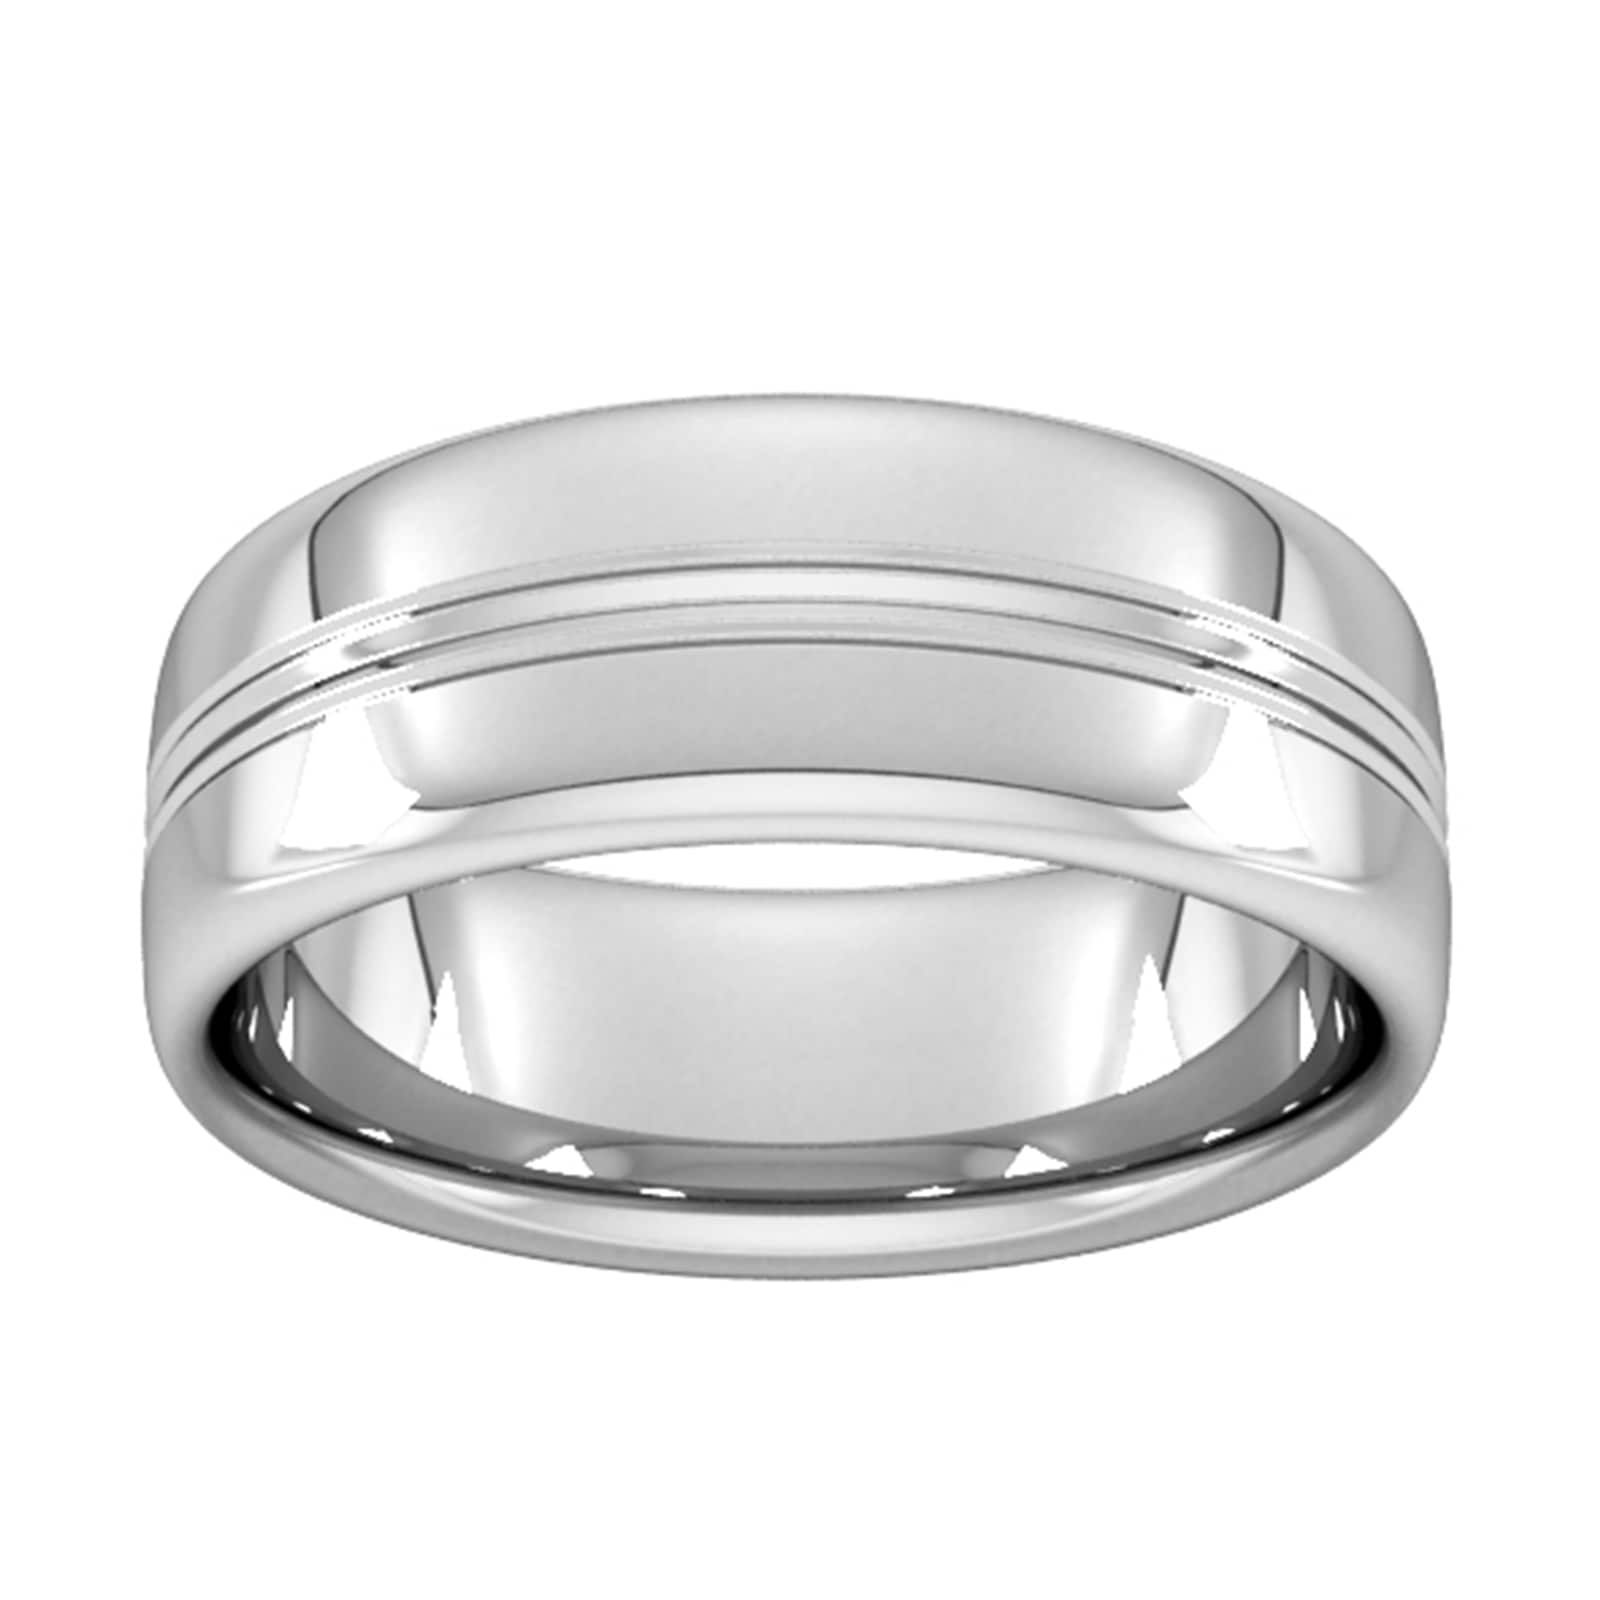 8mm Slight Court Standard Grooved Polished Finish Wedding Ring In 9 Carat White Gold - Ring Size J